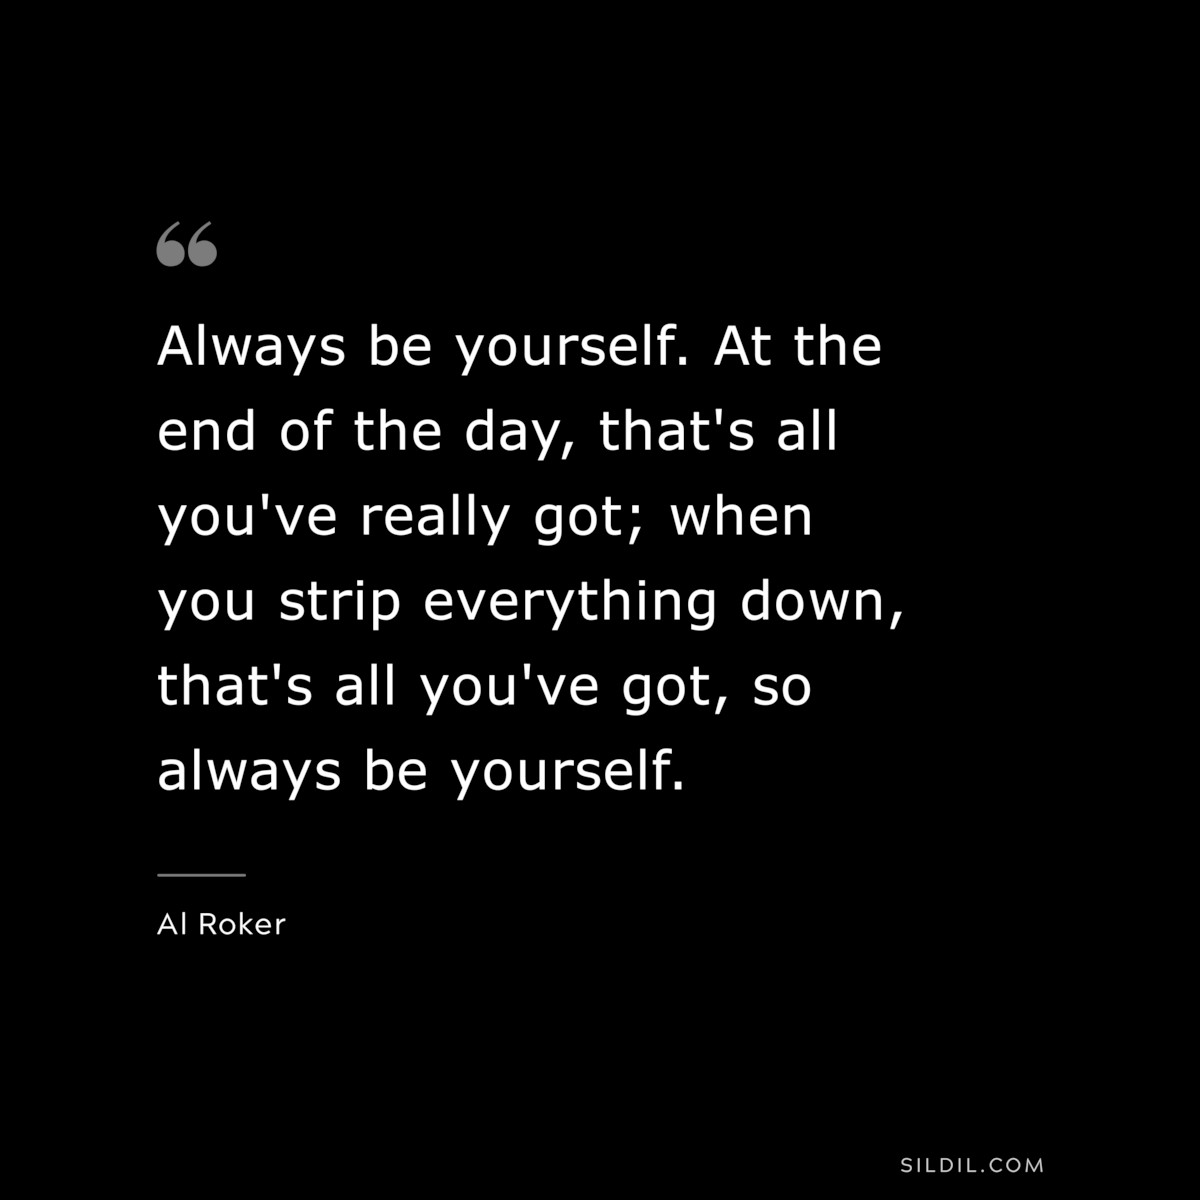 Always be yourself. At the end of the day, that's all you've really got; when you strip everything down, that's all you've got, so always be yourself. ― Al Roker